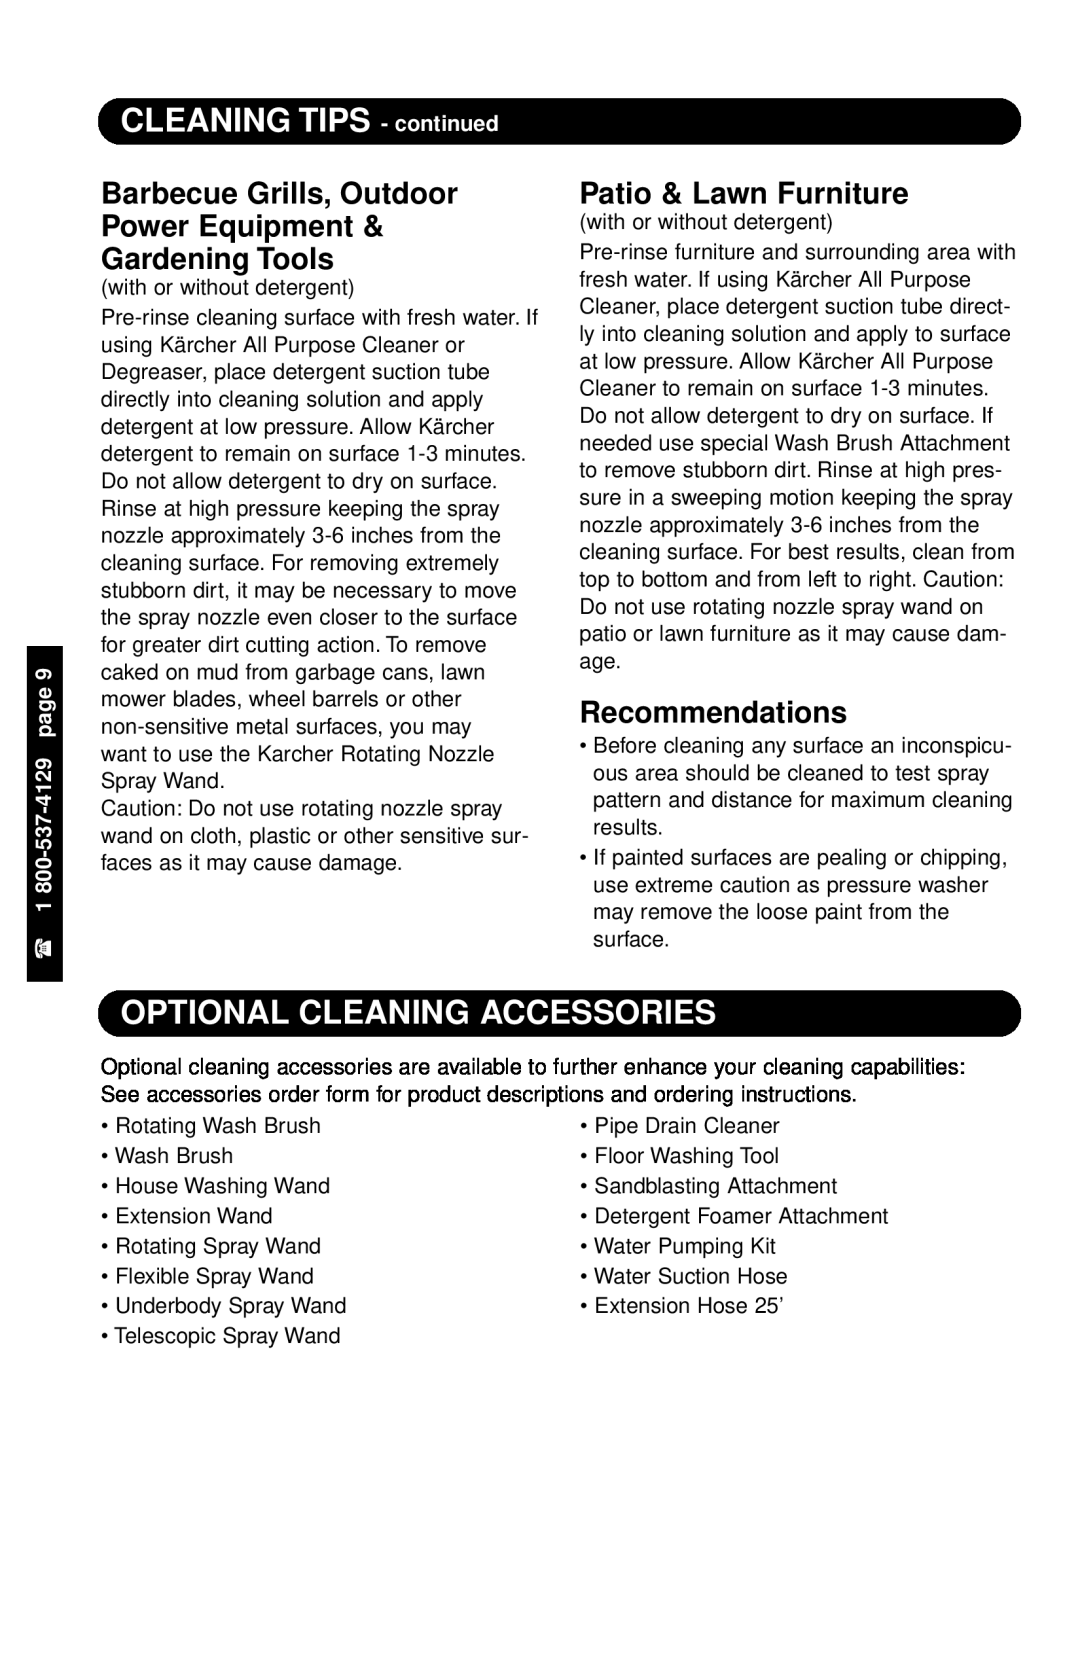 Karcher 1800 CLEANING TIPS - continued, Optional Cleaning Accessories, Barbecue Grills, Outdoor Power Equipment 